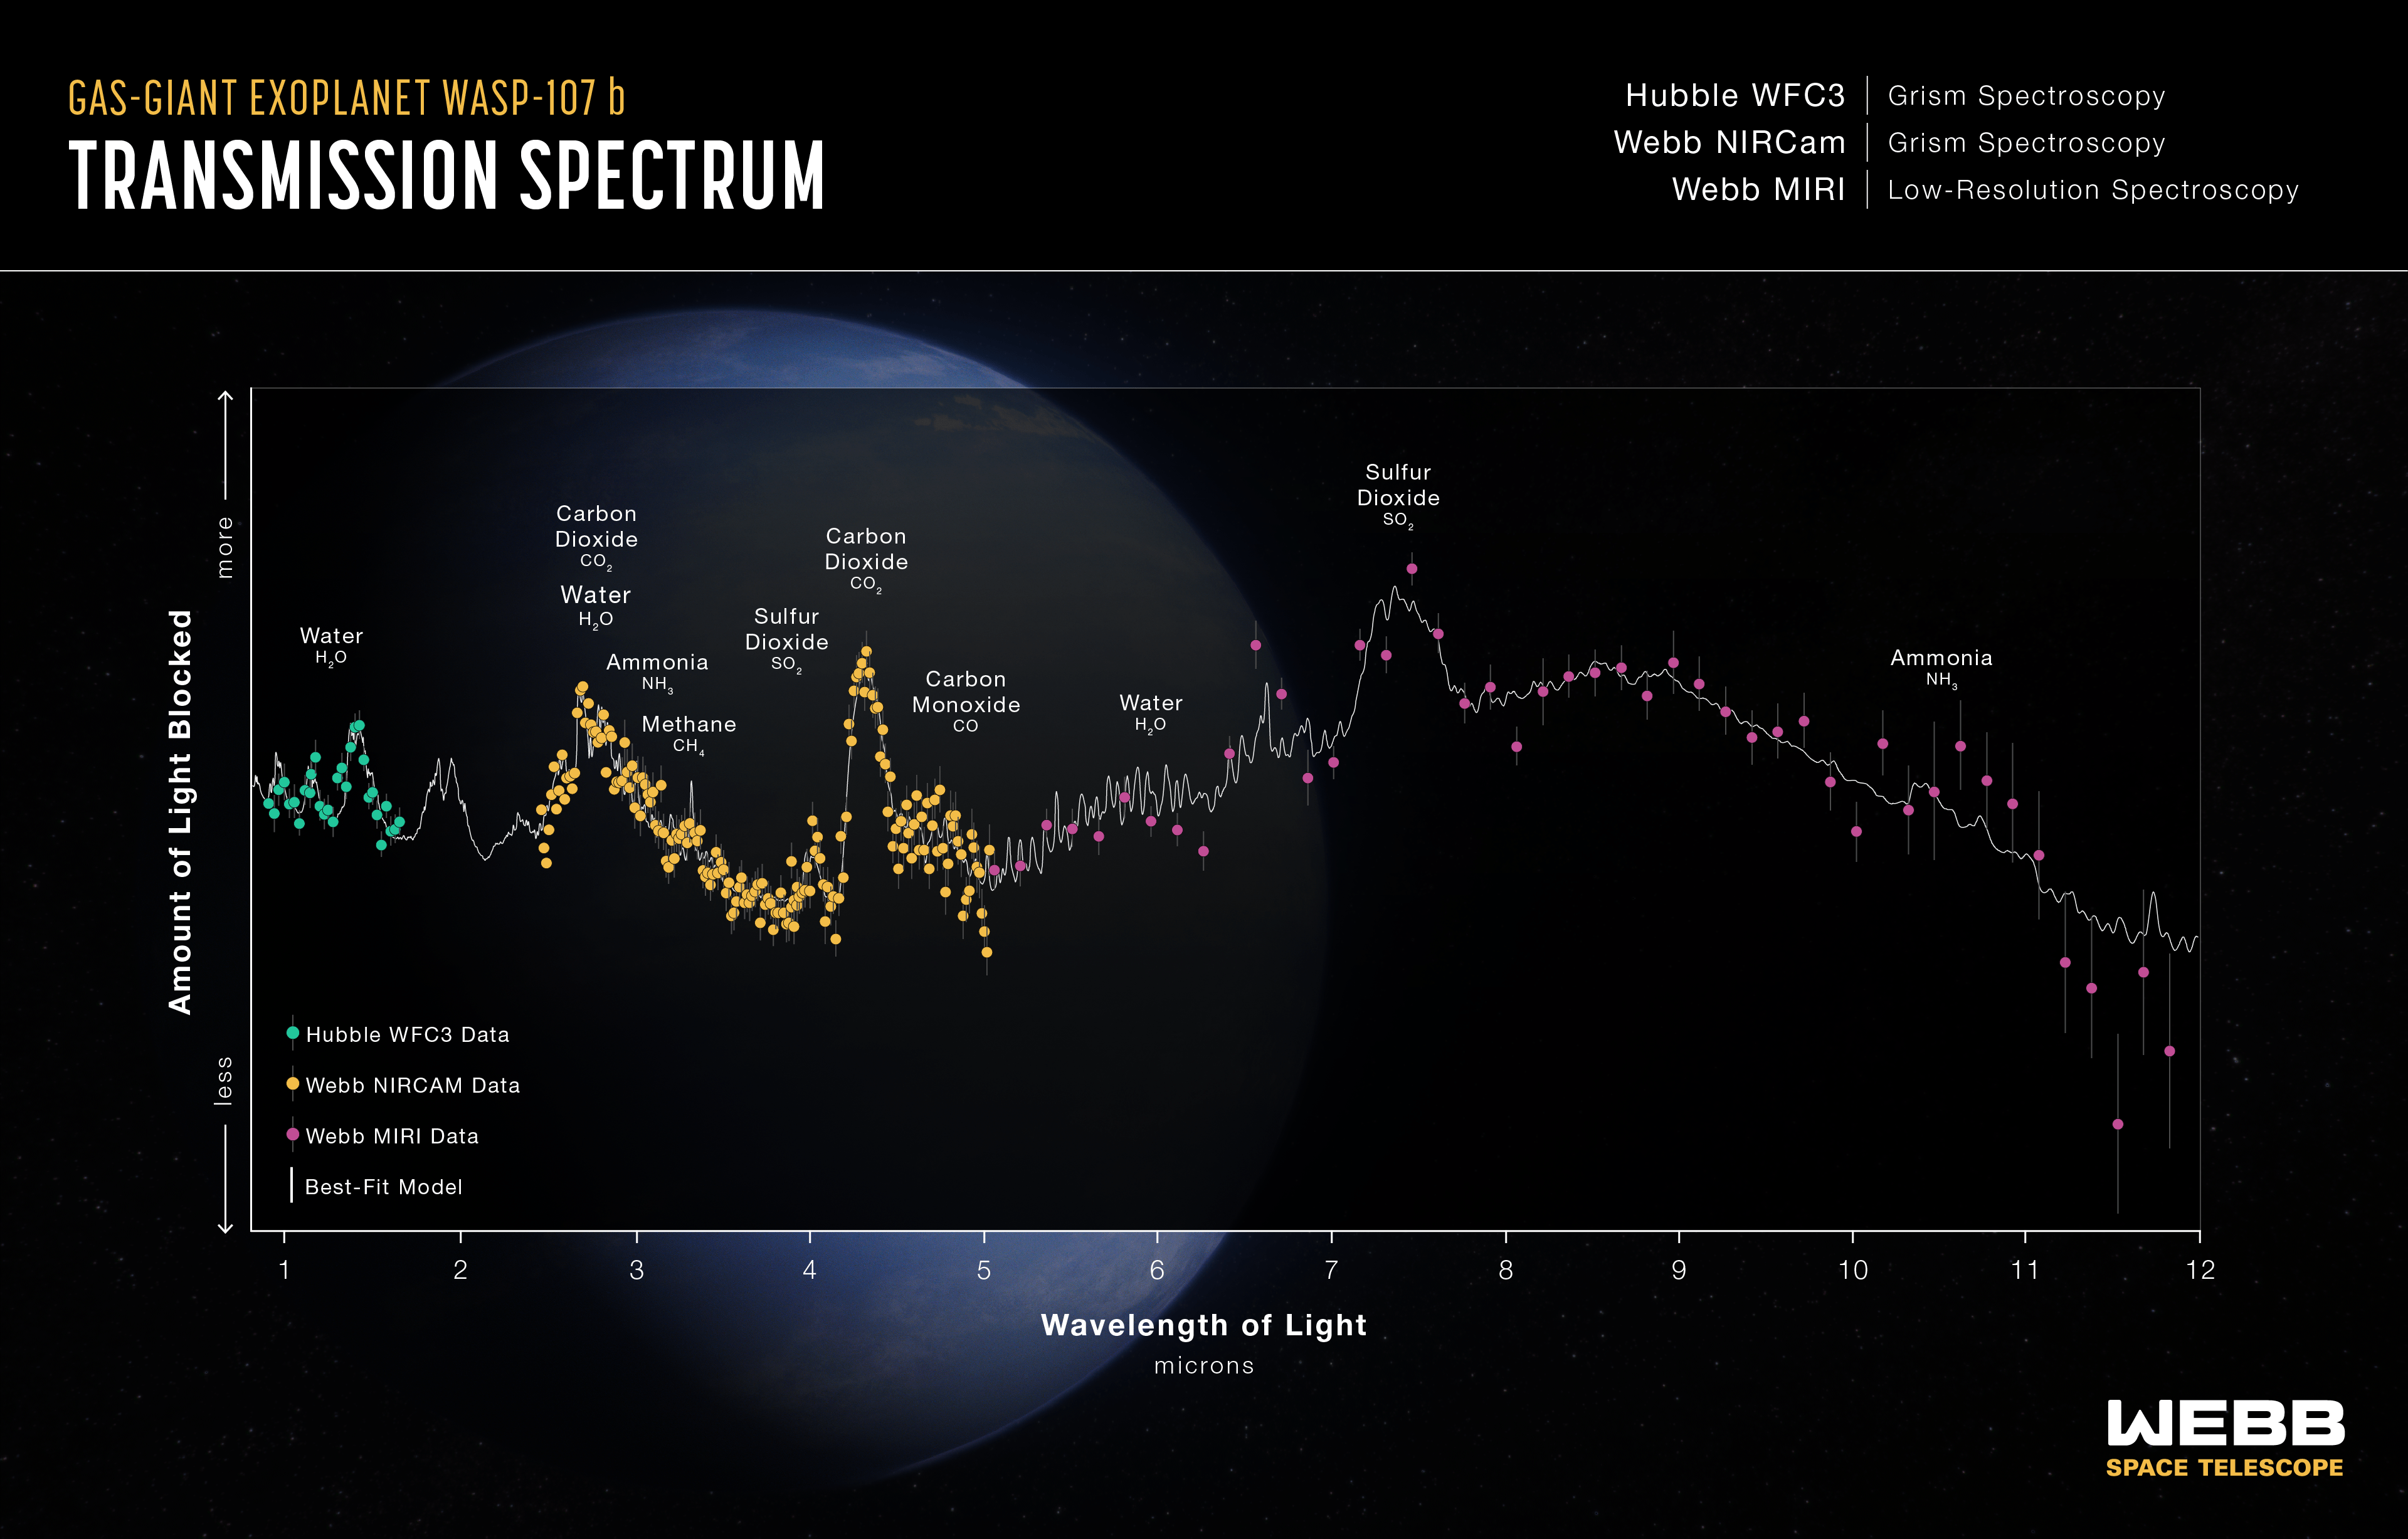 Graphic titled “Hot Gas-Giant Exoplanet WASP-107 b Transmission Spectrum: Hubble WFC3 Grism Spectroscopy; Webb NIRCam Grism Spectroscopy; Webb MIRI Low-Resolution Spectroscopy” has 3 sets of data points with error bars and a best-fit model on a graph of Amount of Light Blocked on the y-axis versus Wavelength of Light in microns on the x-axis. Y-axis ranges from less light blocked at bottom to more light blocked at top. X-axis ranges from 0.8 to 12 microns. Data are identified in a legend. Hubble WFC3: 30 green data points ranging from 0.9 to 1.6 microns; Webb NIRCam: 177 orange data points ranging from 2.5 to 5 microns; Webb MIRI: 46 pink data points ranging from 5 to 12 microns. Best-fit model is a gray line with numerous peaks and valleys. The model and data are closely aligned. Ten features on the graph are labeled: Water H2O; Water H2O and Carbon Dioxide CO2; Ammonia NH3; Methane CH4; Sulfur Dioxide SO2; Carbon Dioxide CO2; Carbon Monoxide CO; Water H2O; Sulfur Dioxide SO2; and Ammonia NH3.